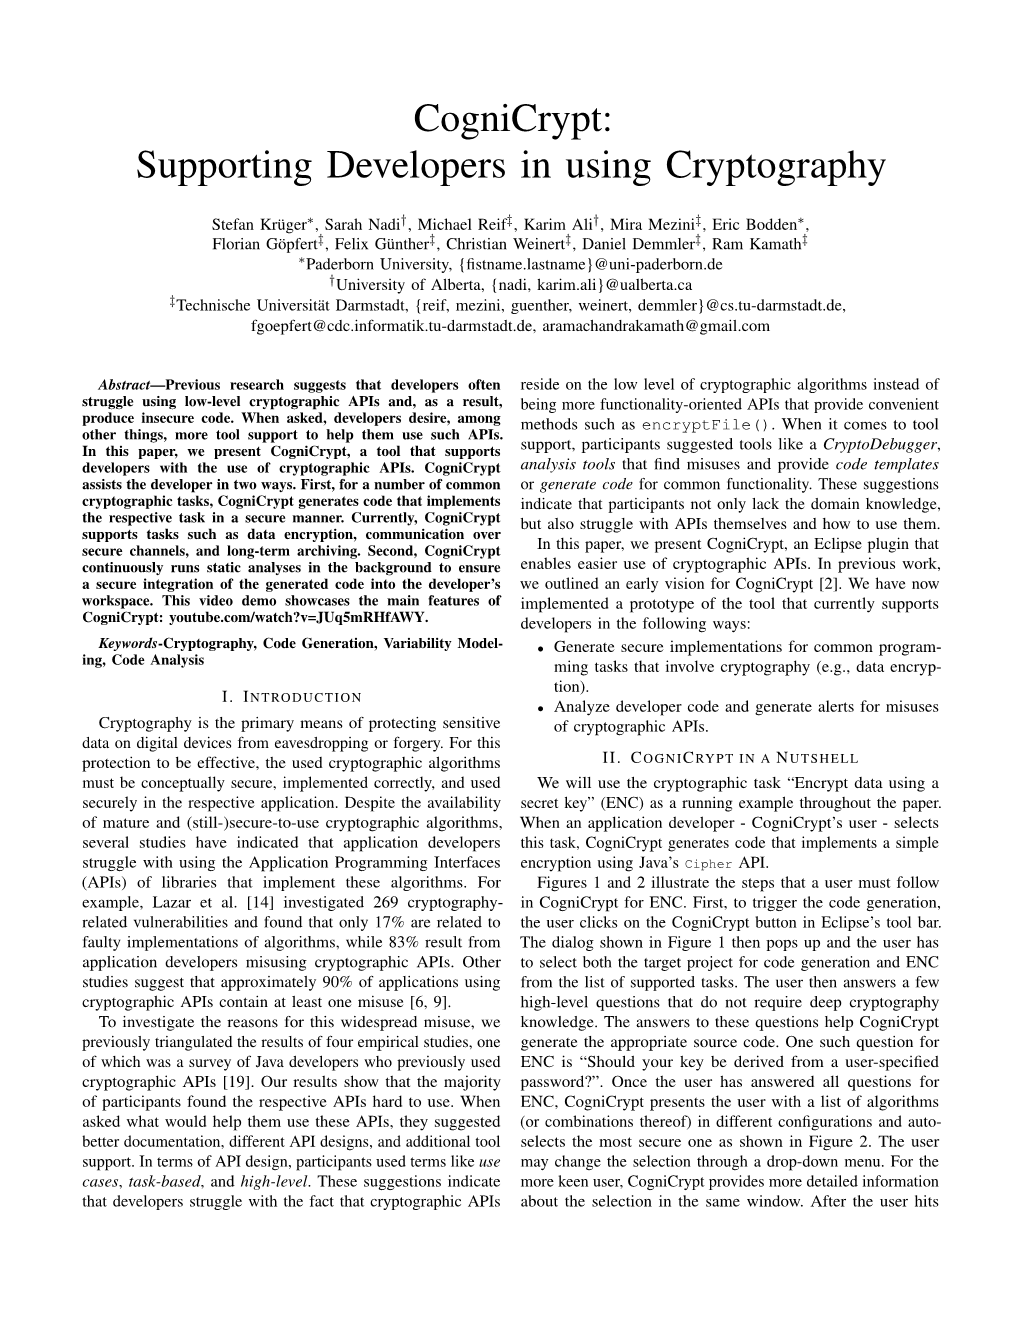 Cognicrypt: Supporting Developers in Using Cryptography